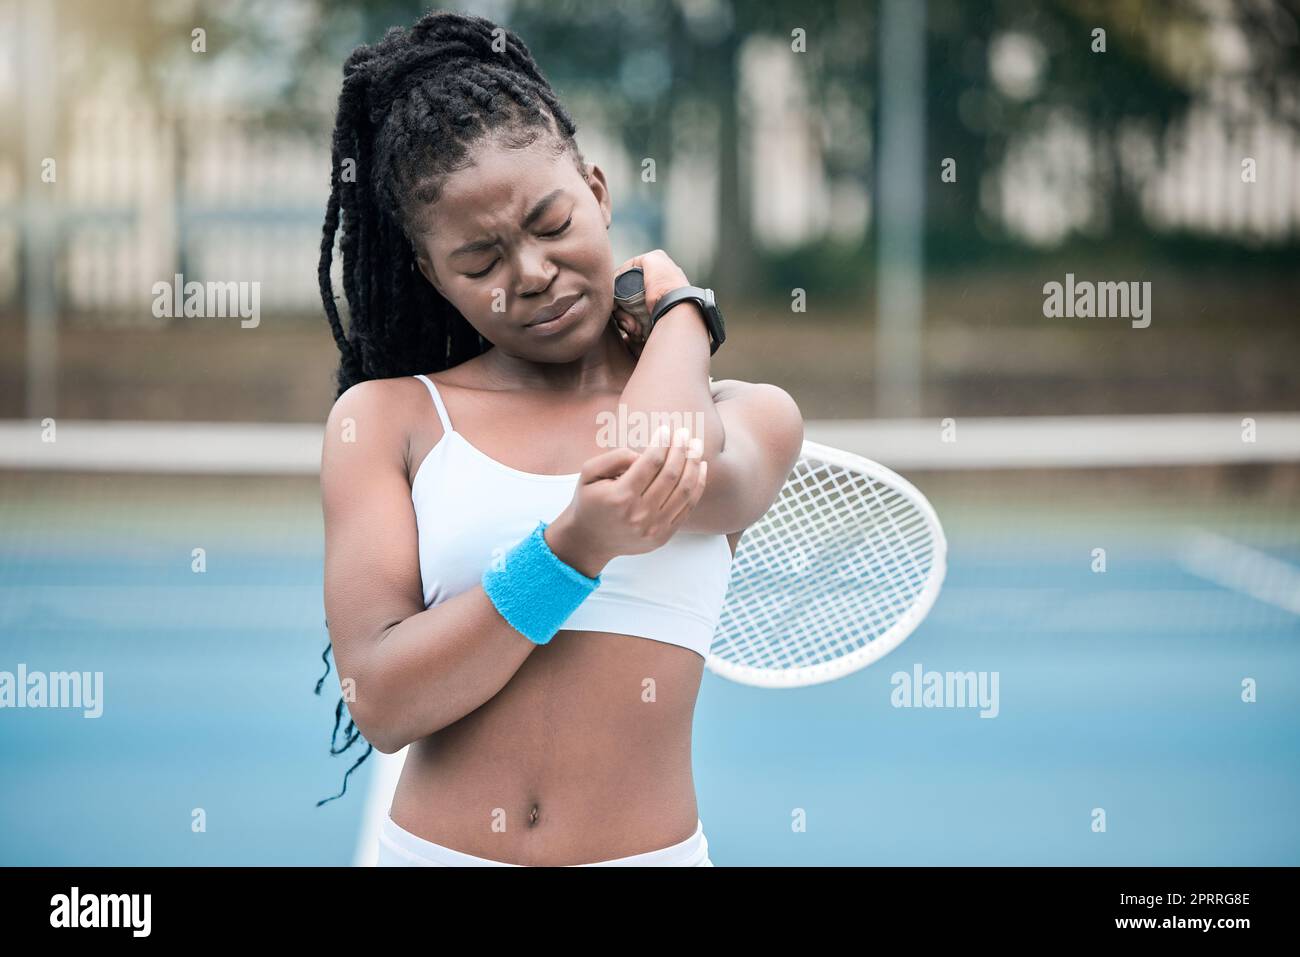 Injury, pain and elbow of tennis woman player with sad, hurt or crying emotion during match, game or training outdoor. Sports fitness athlete person with bone health stress or medical sport emergency Stock Photo